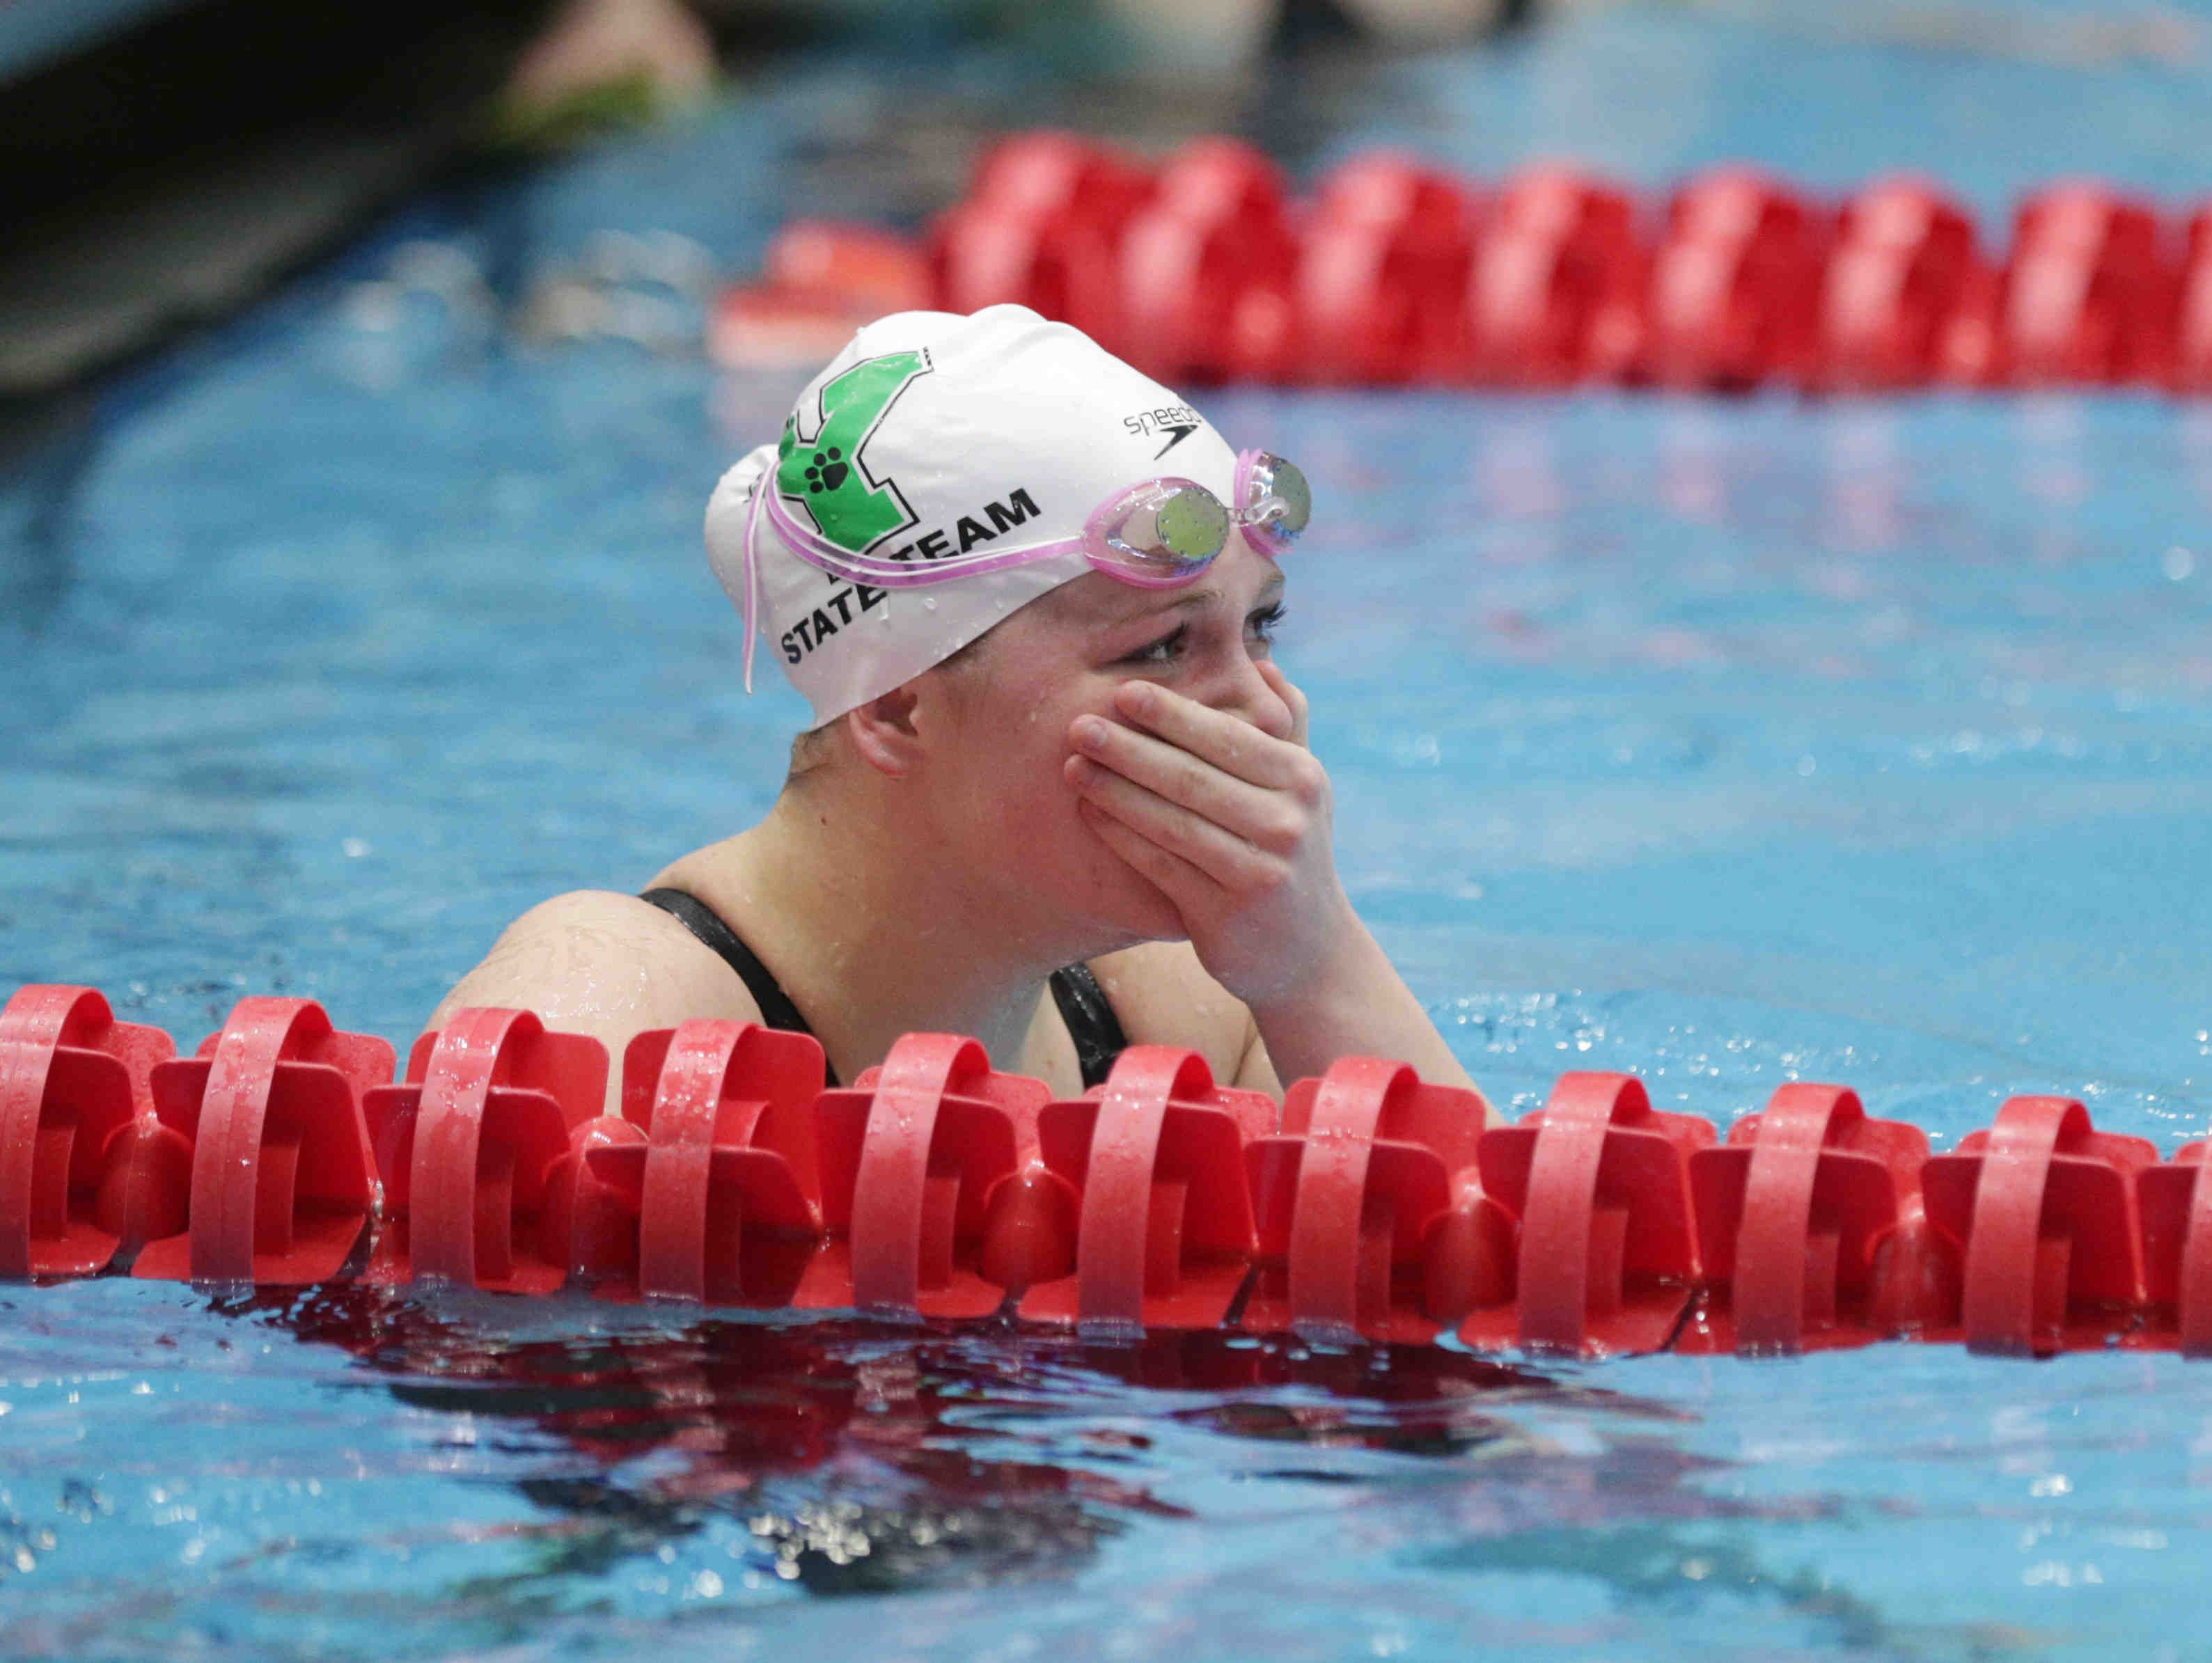 Yorktown's Emily Weiss looks at her time after completing the girls 100 yard breaststroke, during the IHSAA girls swimming state finals, held at IUPUI Natatorium, Feb. 11, 2017.